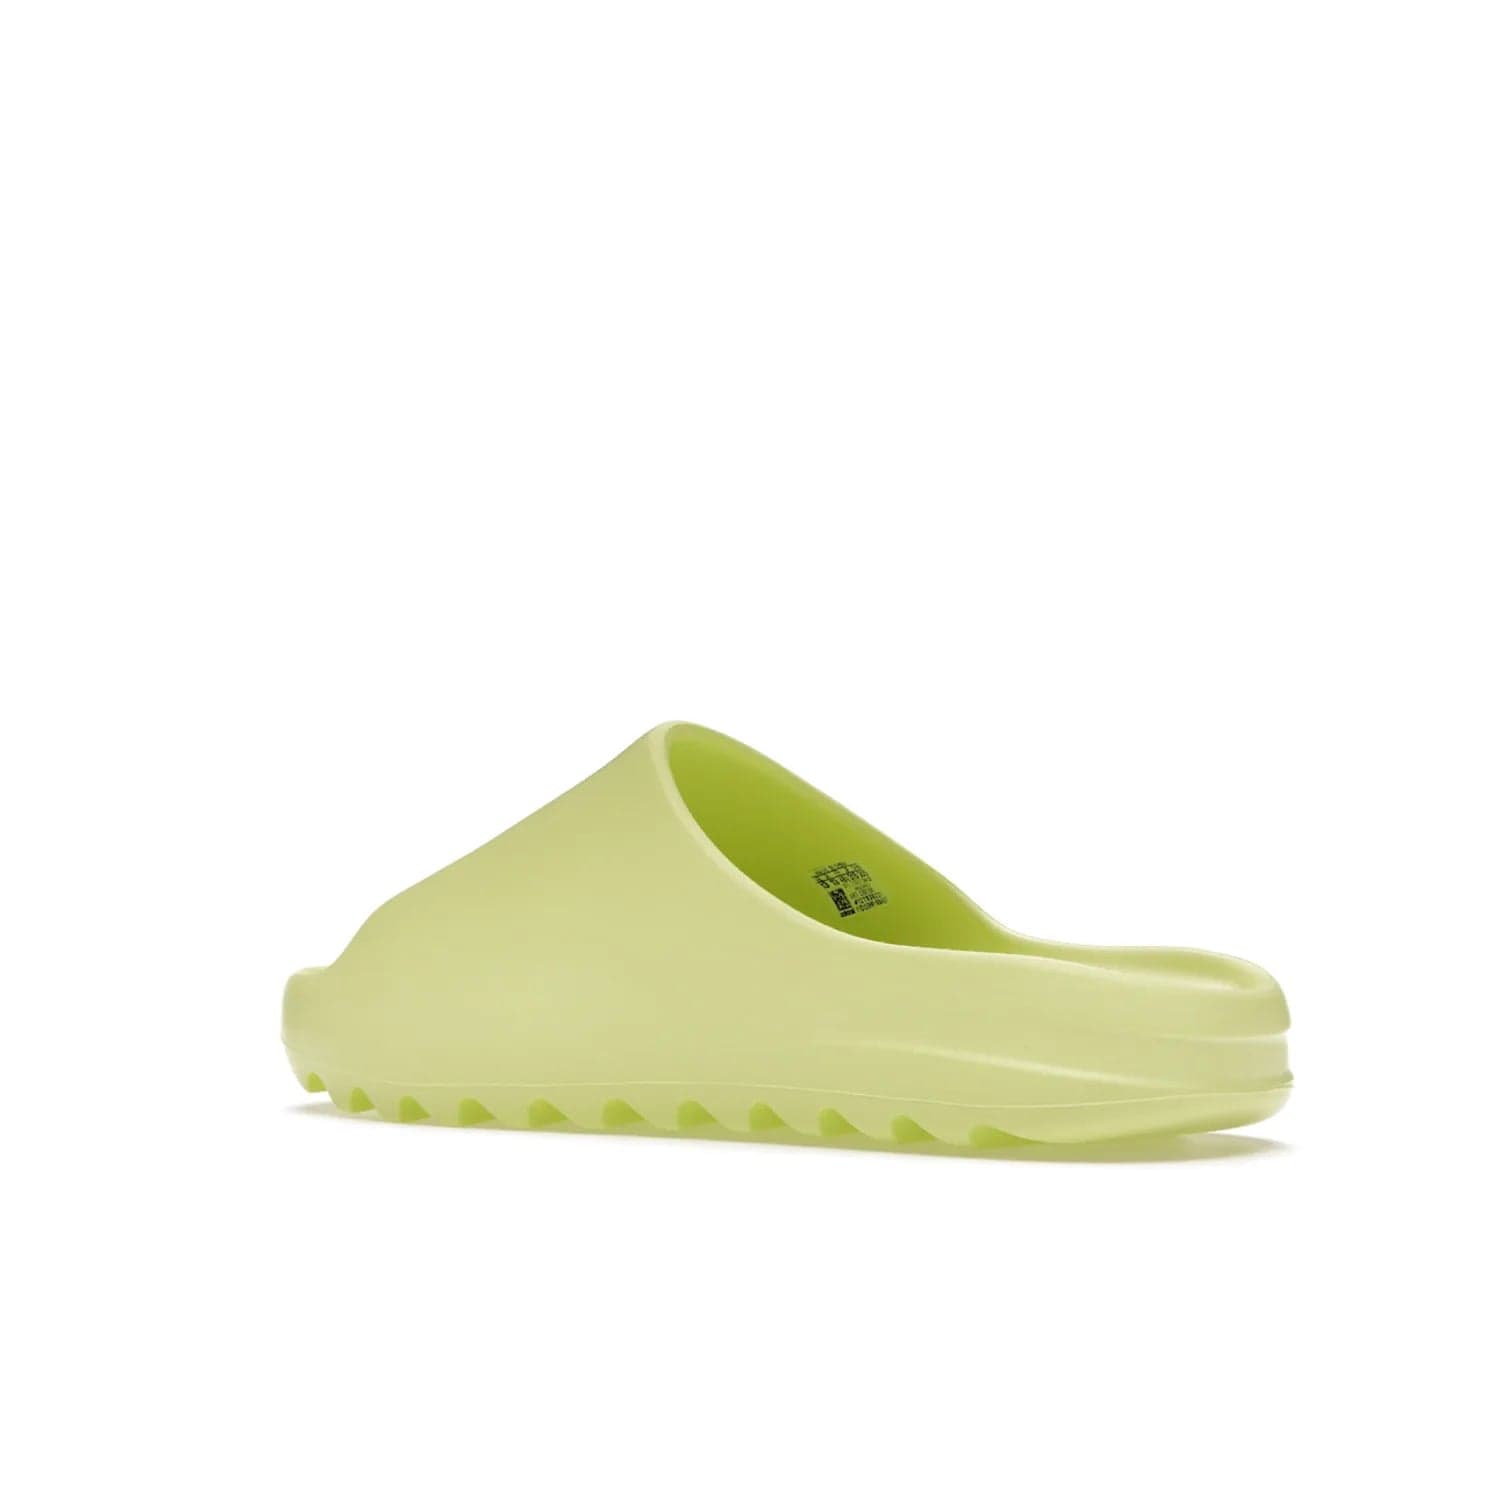 adidas Yeezy Slide Glow Green - Image 23 - Only at www.BallersClubKickz.com - Experience an unexpected summer style with the adidas Yeezy Slide Glow Green. This limited edition slide sandal provides a lightweight and durable construction and a bold Glow Green hue. Strategic grooves enhance traction and provide all-day comfort. Make a statement with the adidas Yeezy Slide Glow Green.